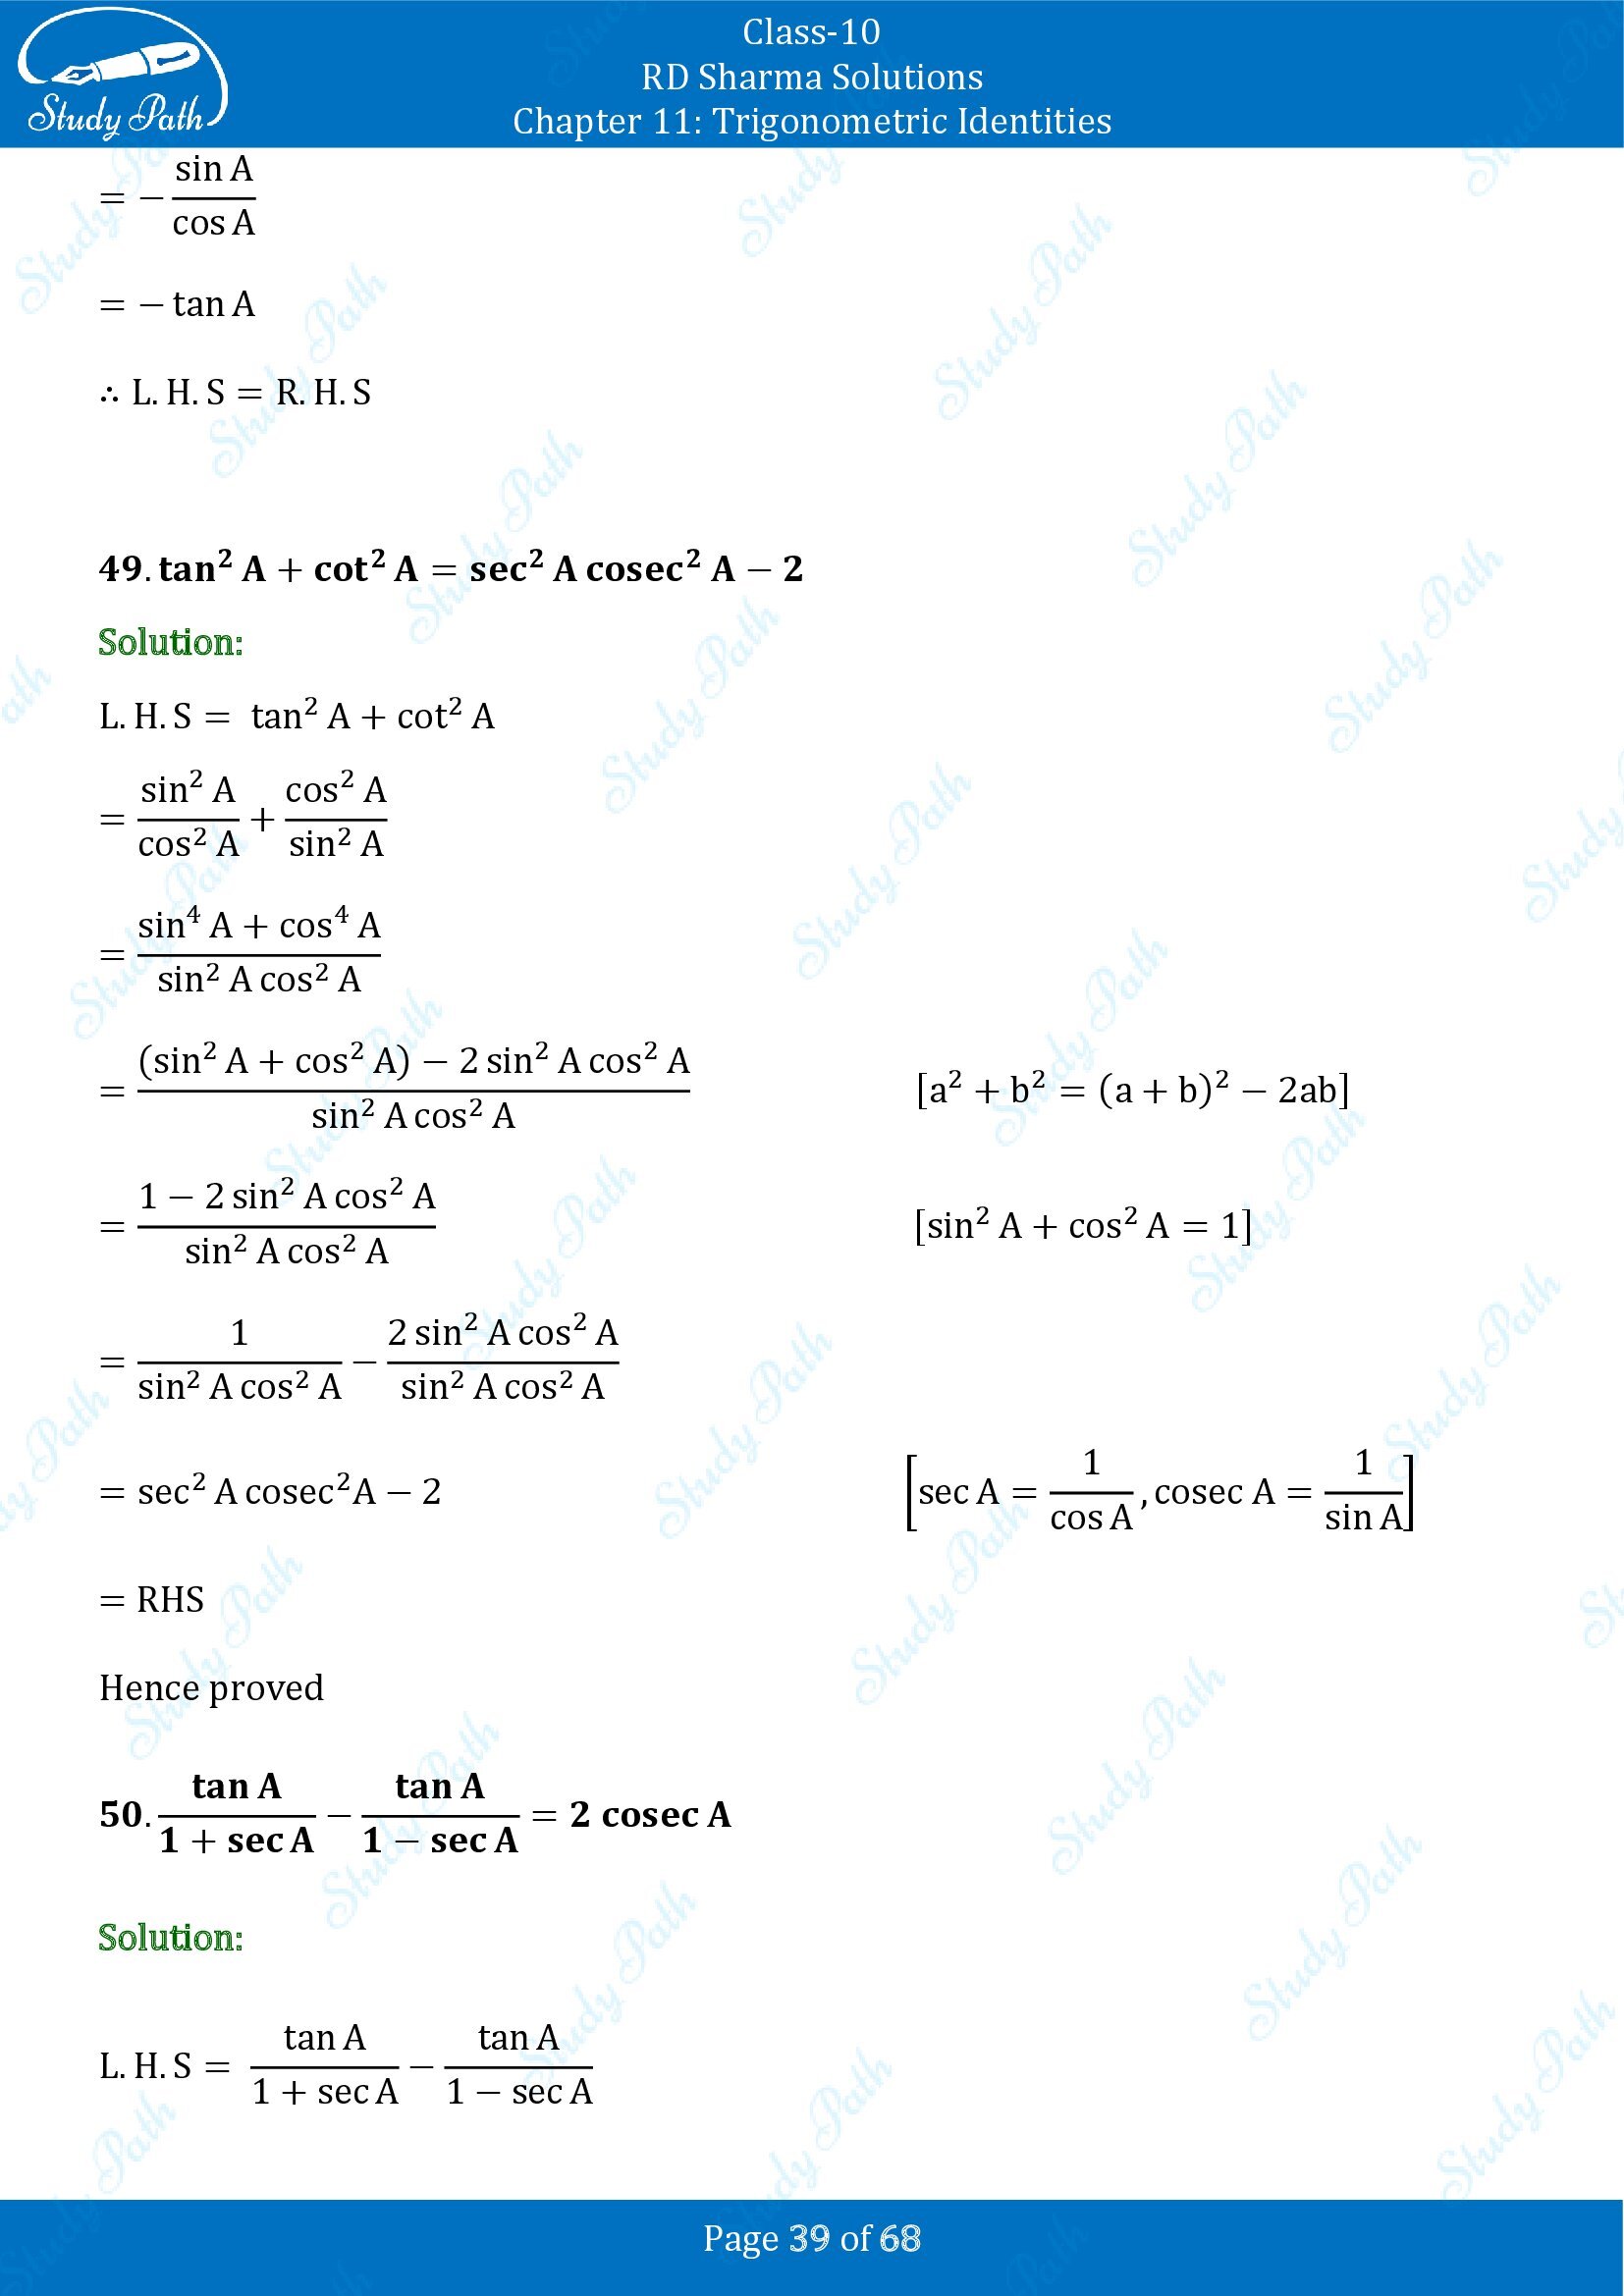 RD Sharma Solutions Class 10 Chapter 11 Trigonometric Identities Exercise 11.1 00039